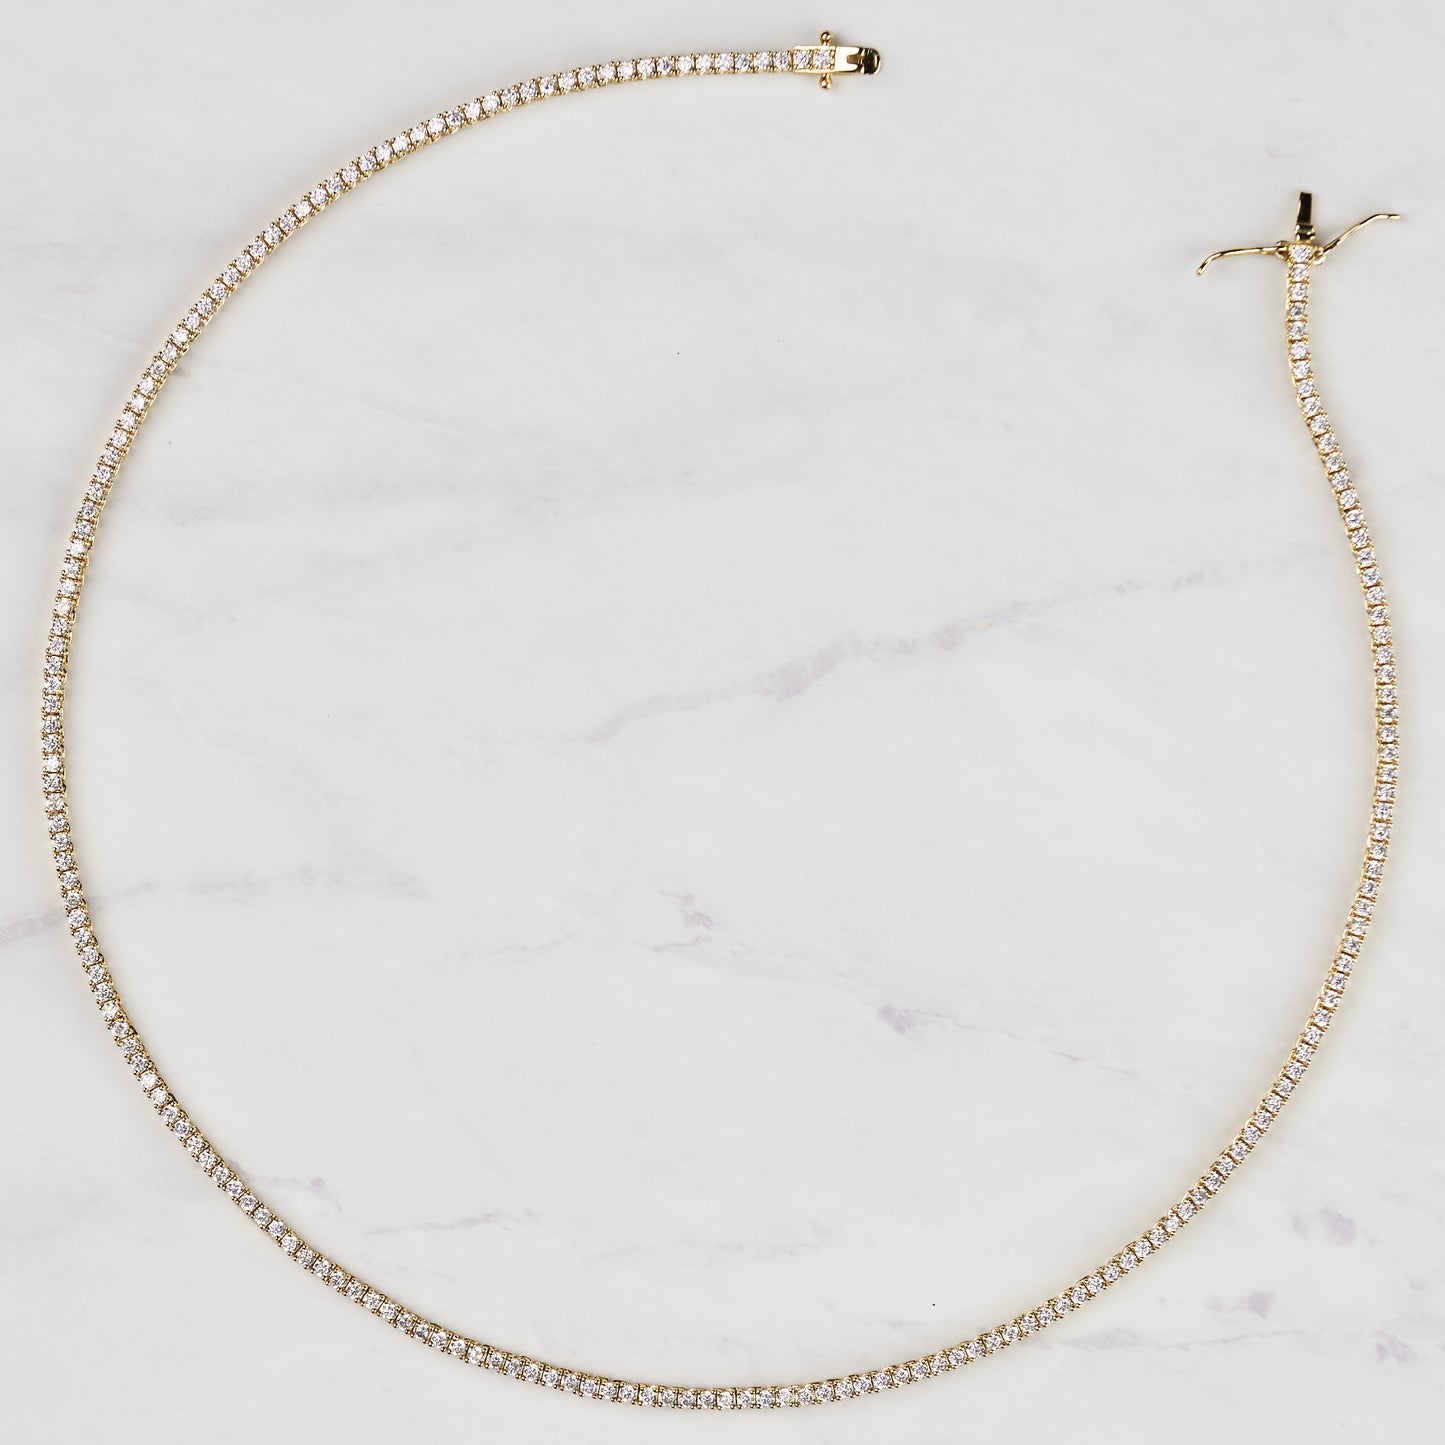 Heirloom Tennis Necklace in Gold - 2mm